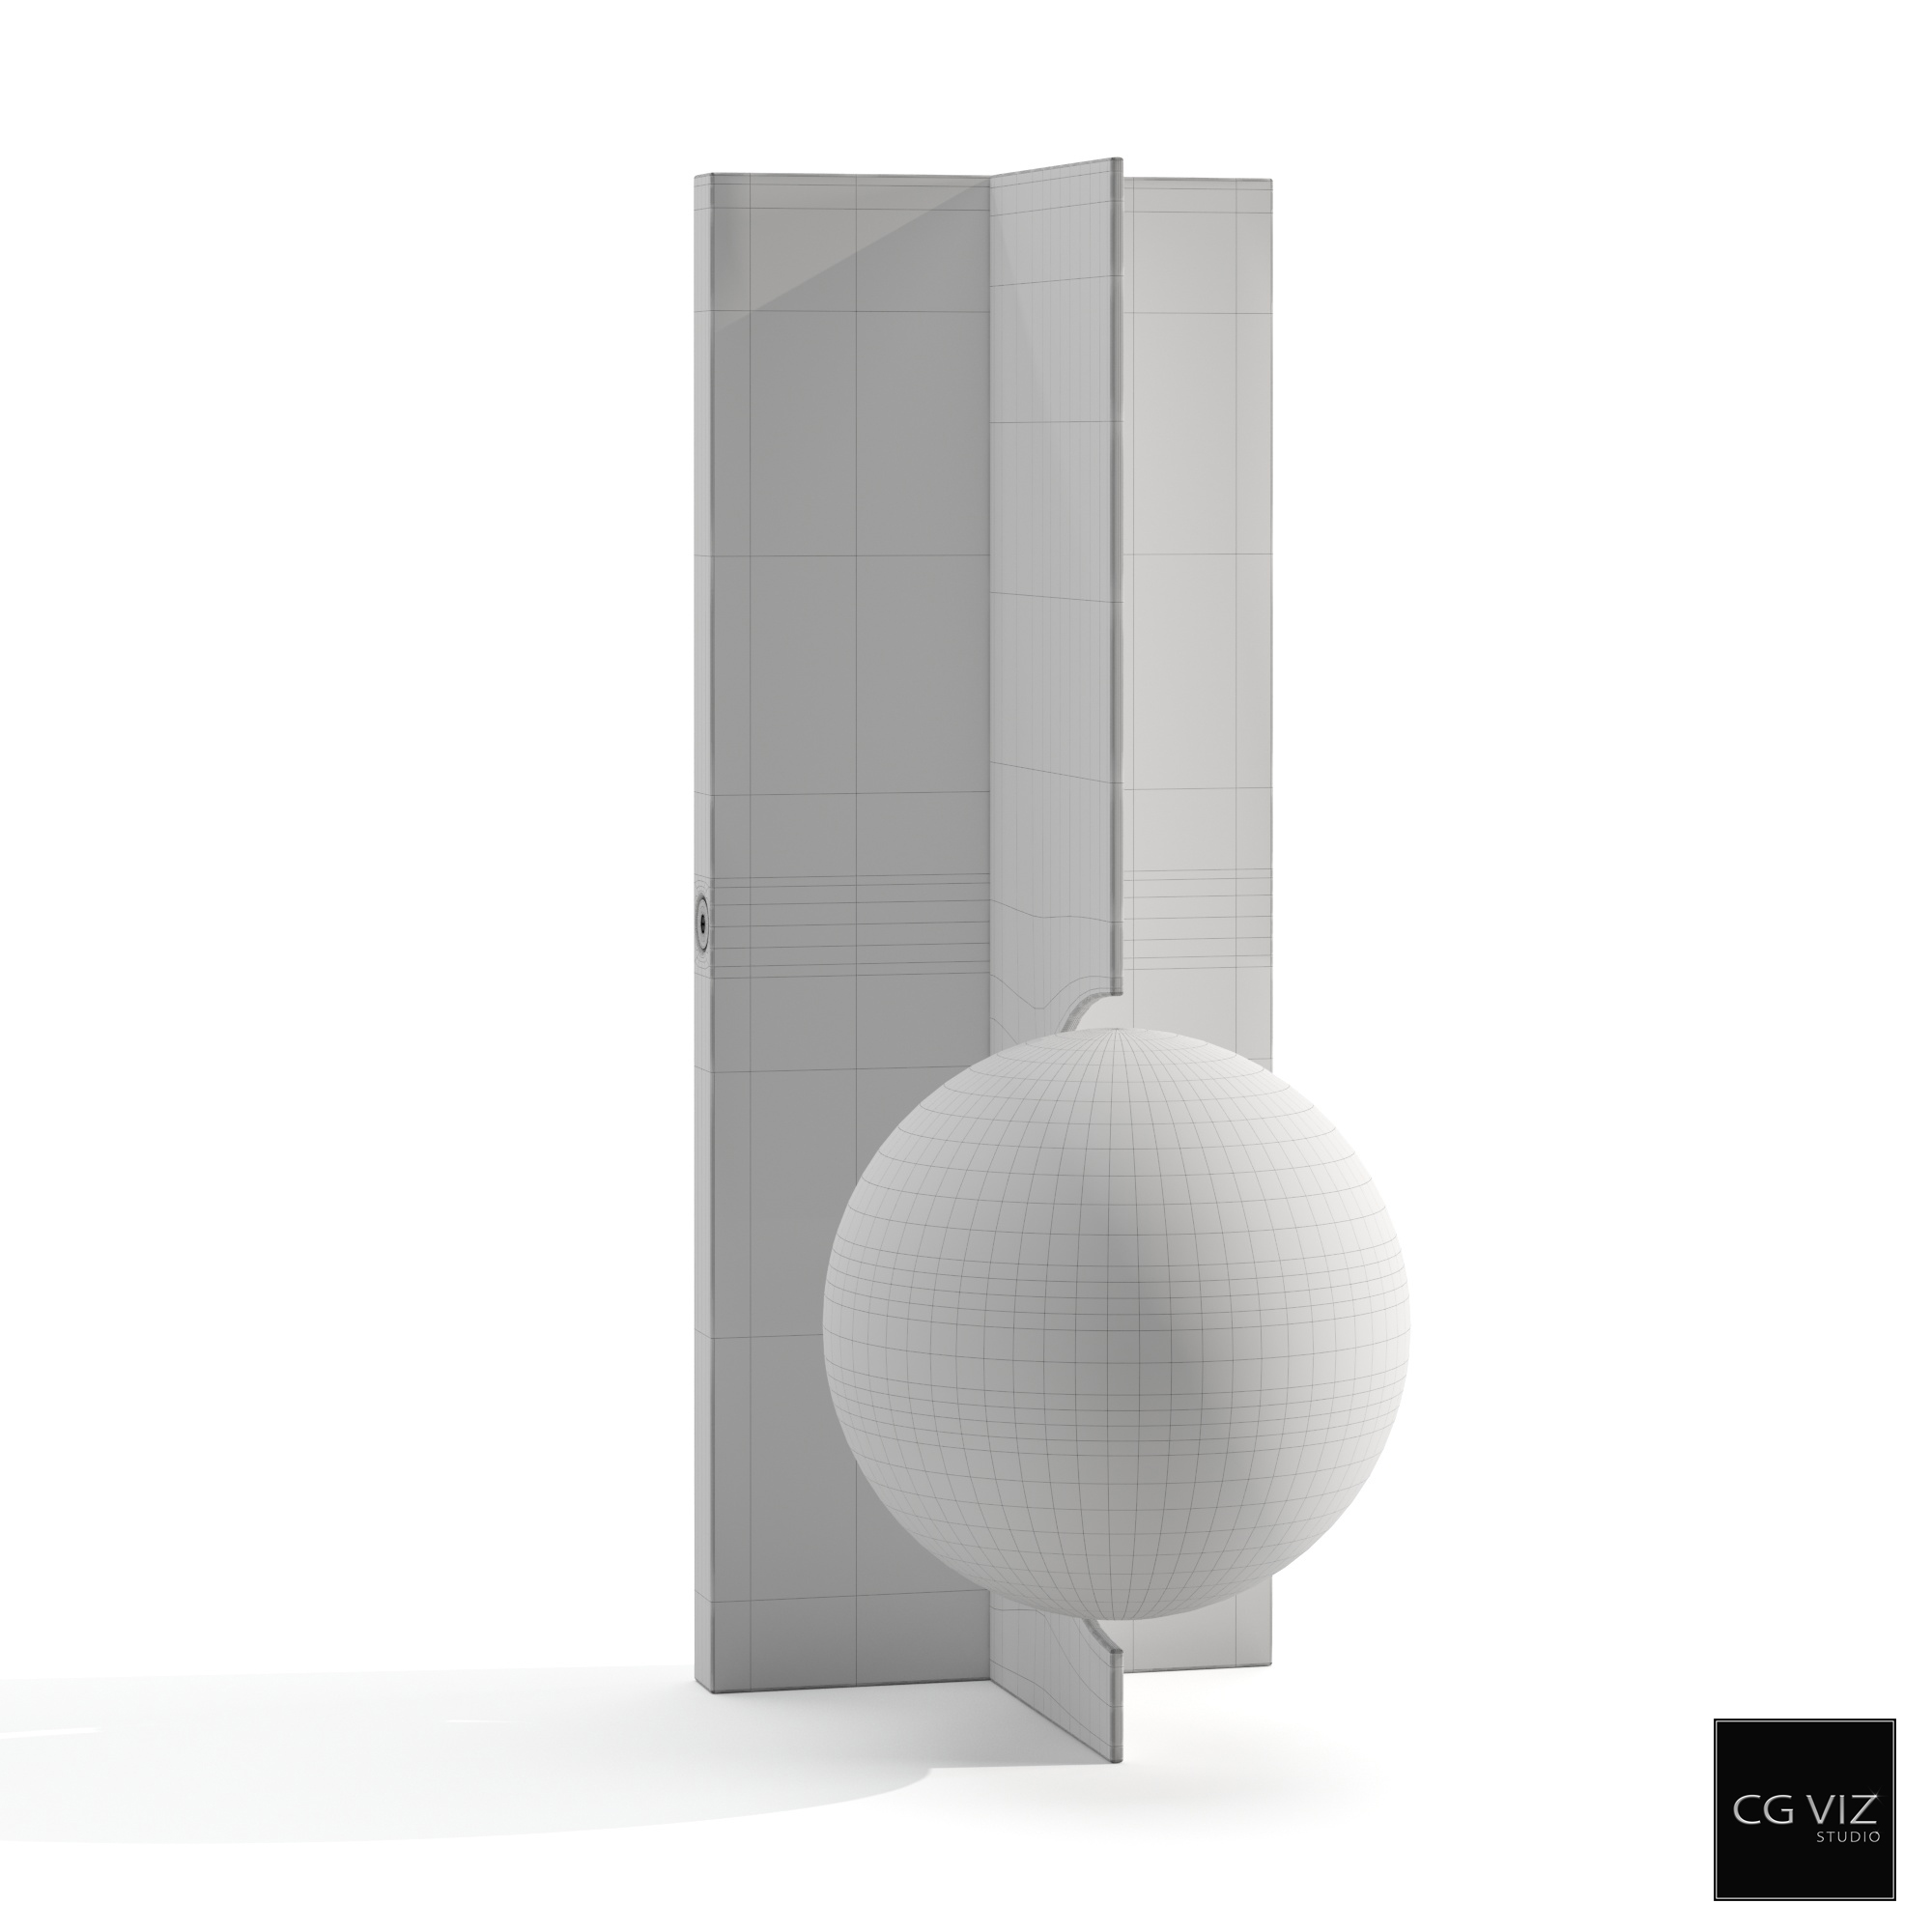 Wireframe View of Circa Orbel Wall Sconce 3D Model